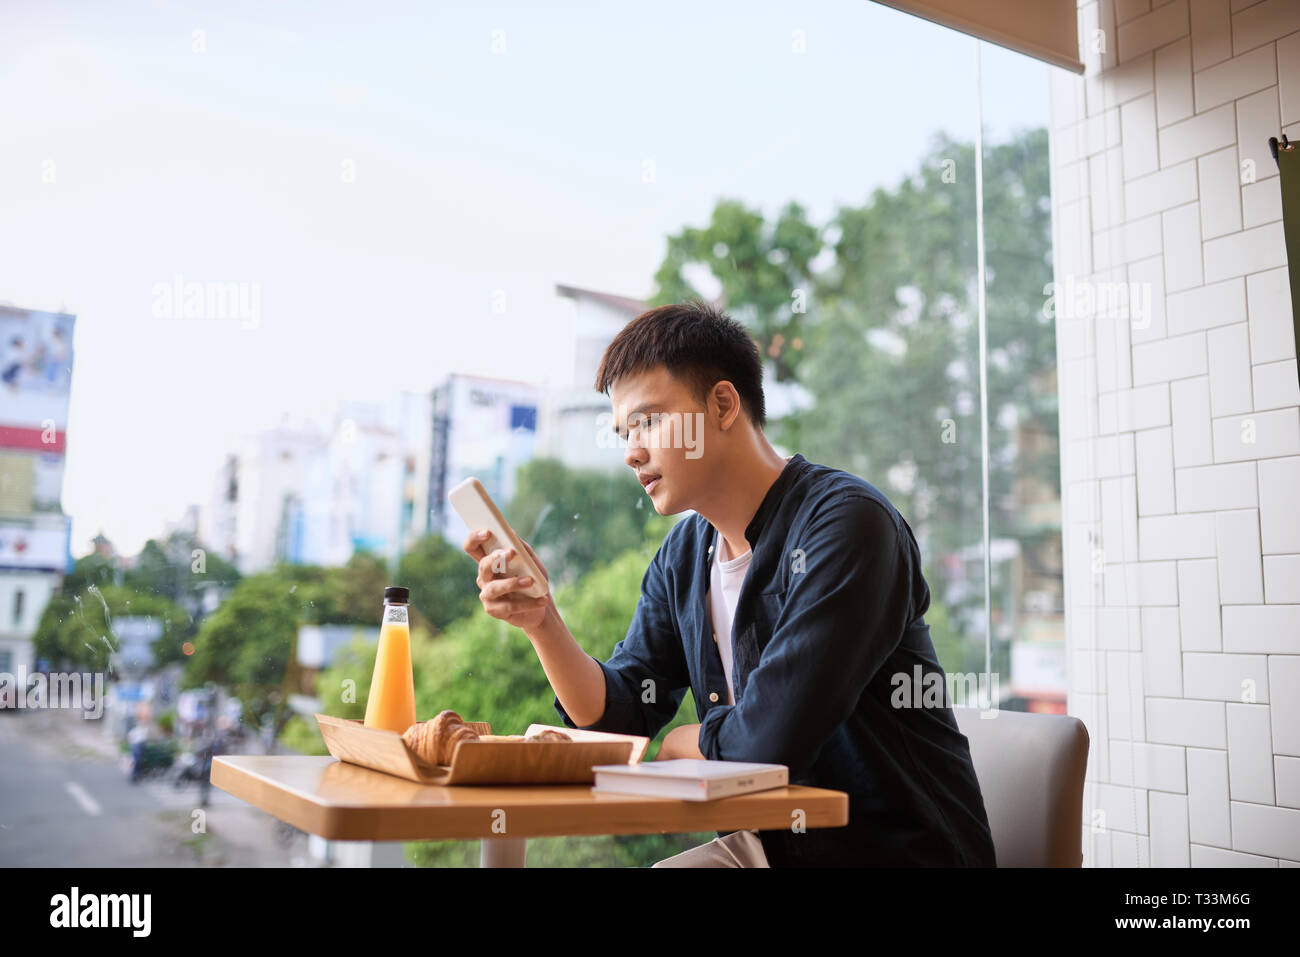 Men use phone on tea time, using mobile smart phone, Internet of things lifestyle with wireless communication and internet with smartphone. Stock Photo